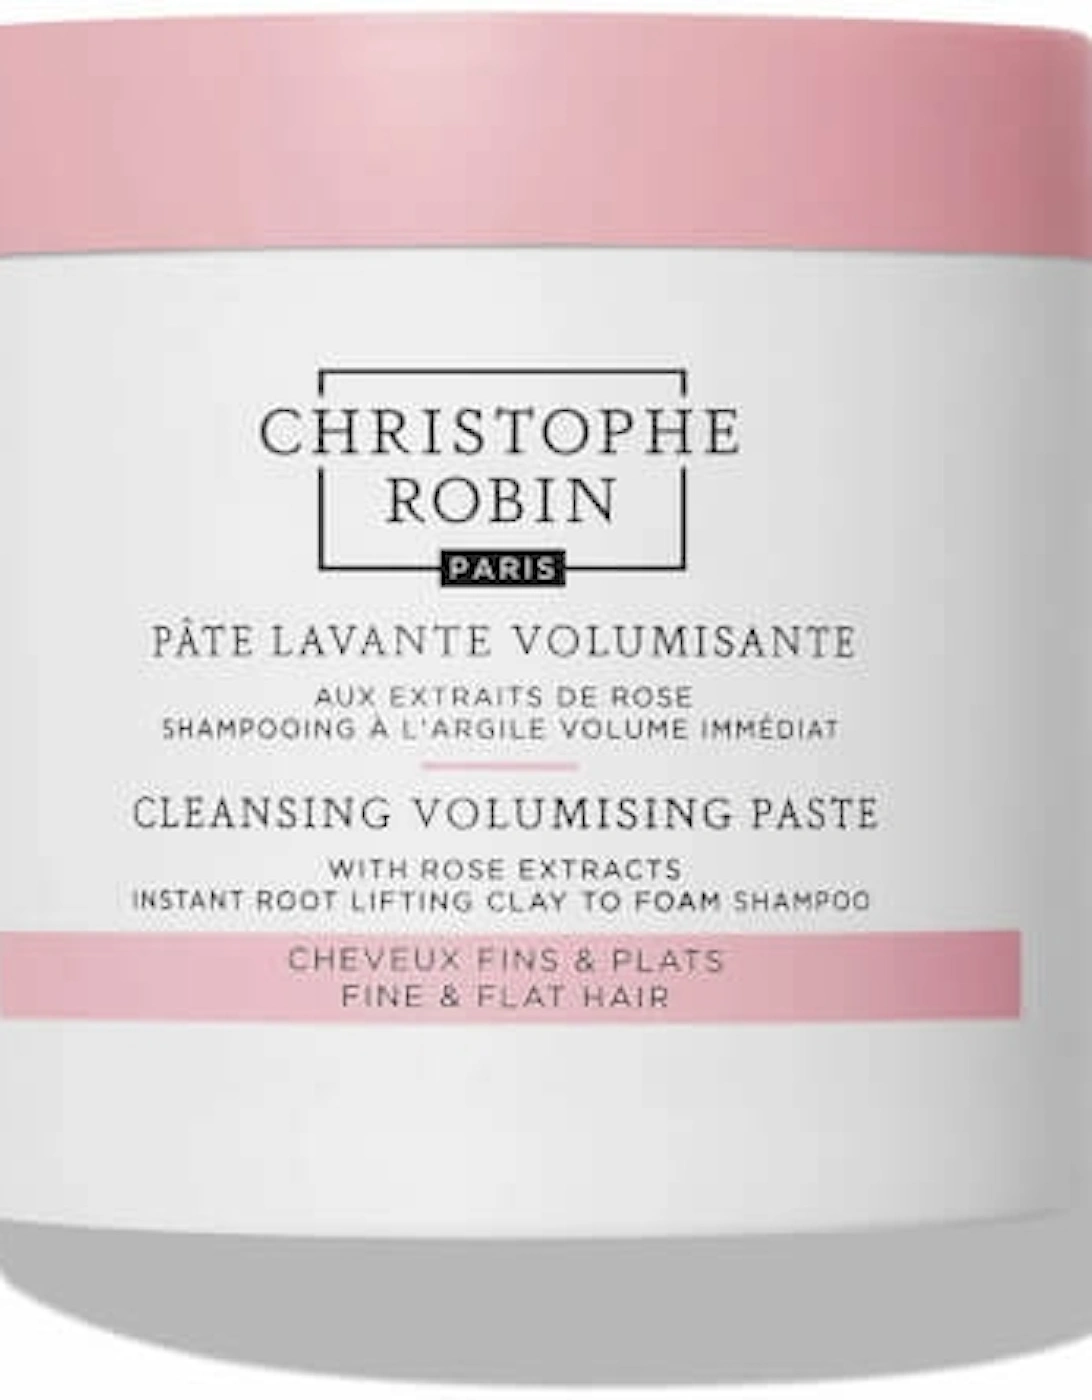 Cleansing Volumising Paste with Pure Rassoul Clay and Rose 250ml - - Cleansing Volumising Paste with Pure Rassoul Clay and Rose Extracts 250ml - Gige, 2 of 1